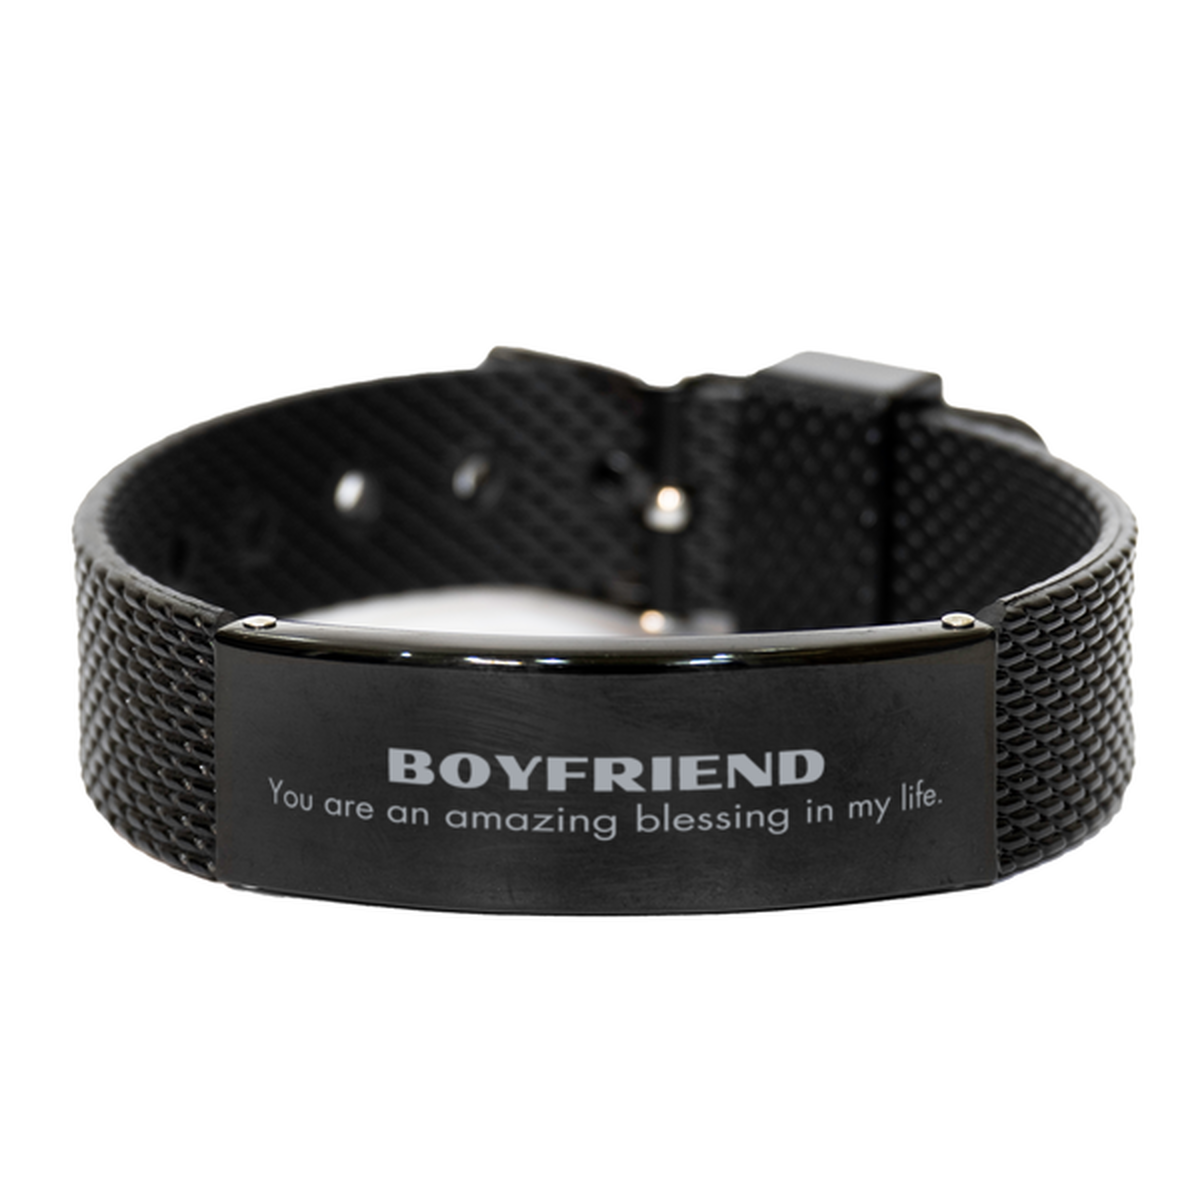 Boyfriend Black Shark Mesh Bracelet, You are an amazing blessing in my life, Thank You Gifts For Boyfriend, Inspirational Birthday Christmas Unique Gifts For Boyfriend